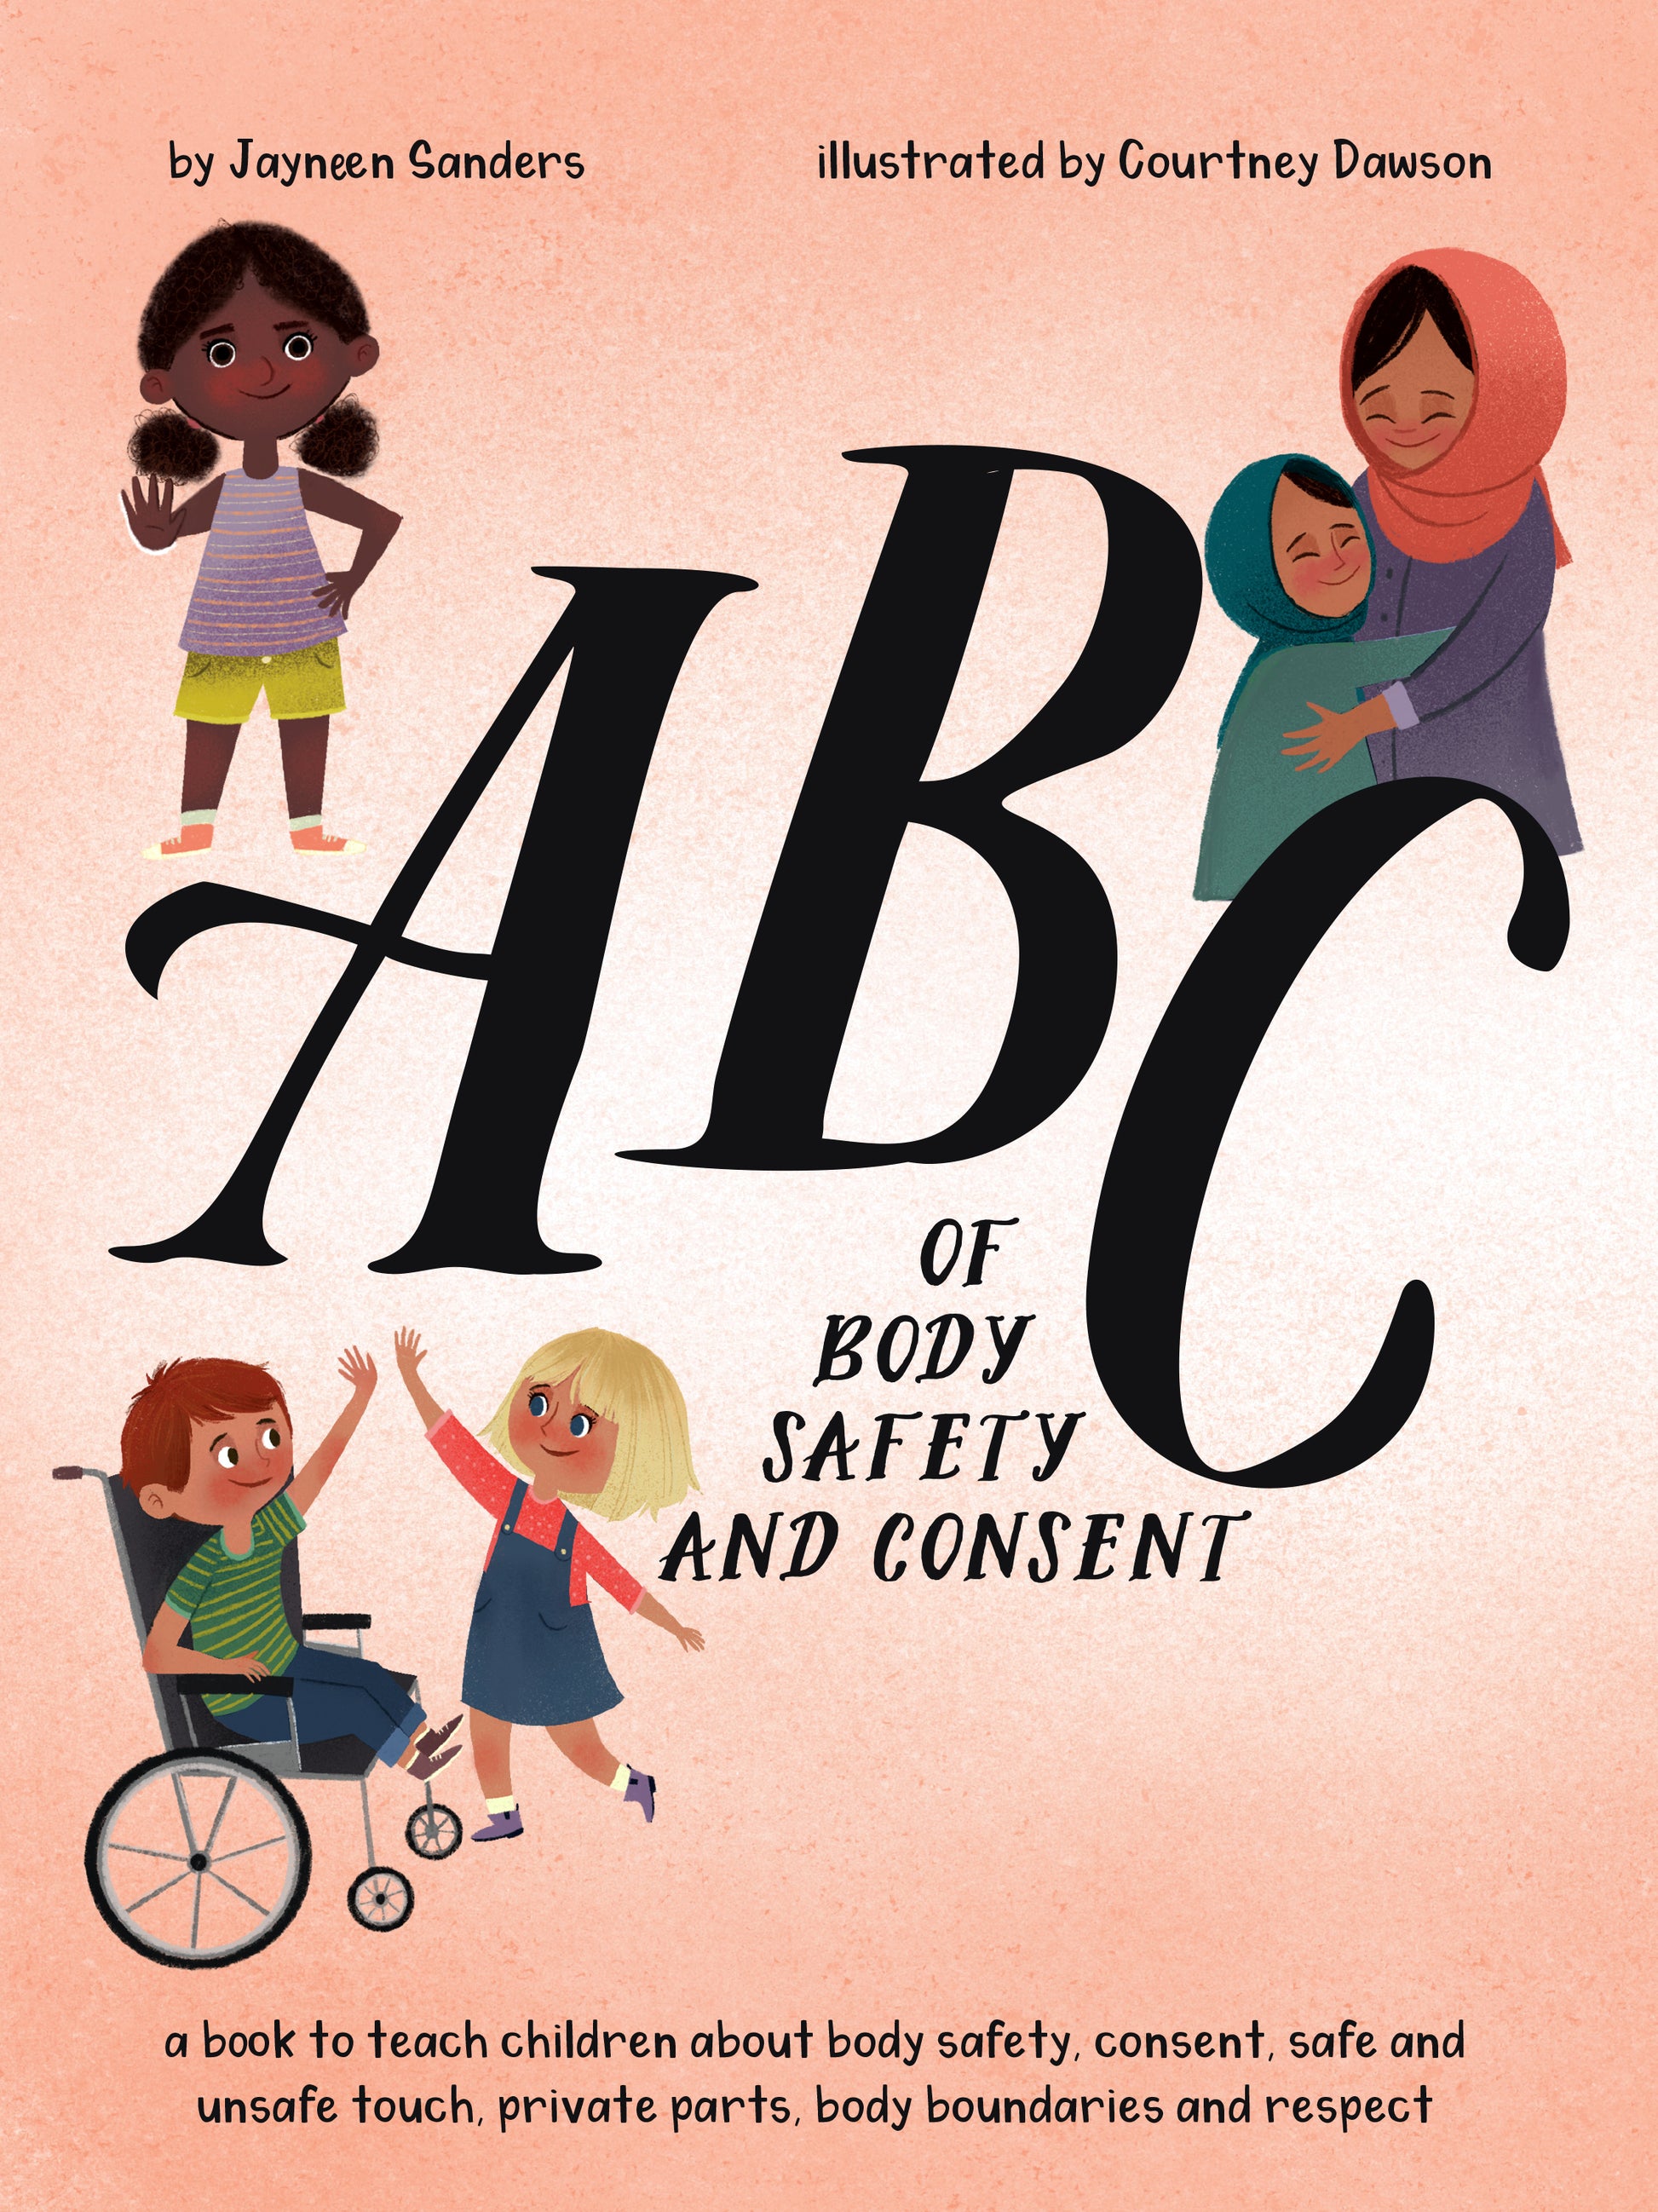 The cover of the book 'ABC of Body Safety and Consent' by Jayneen Sanders.